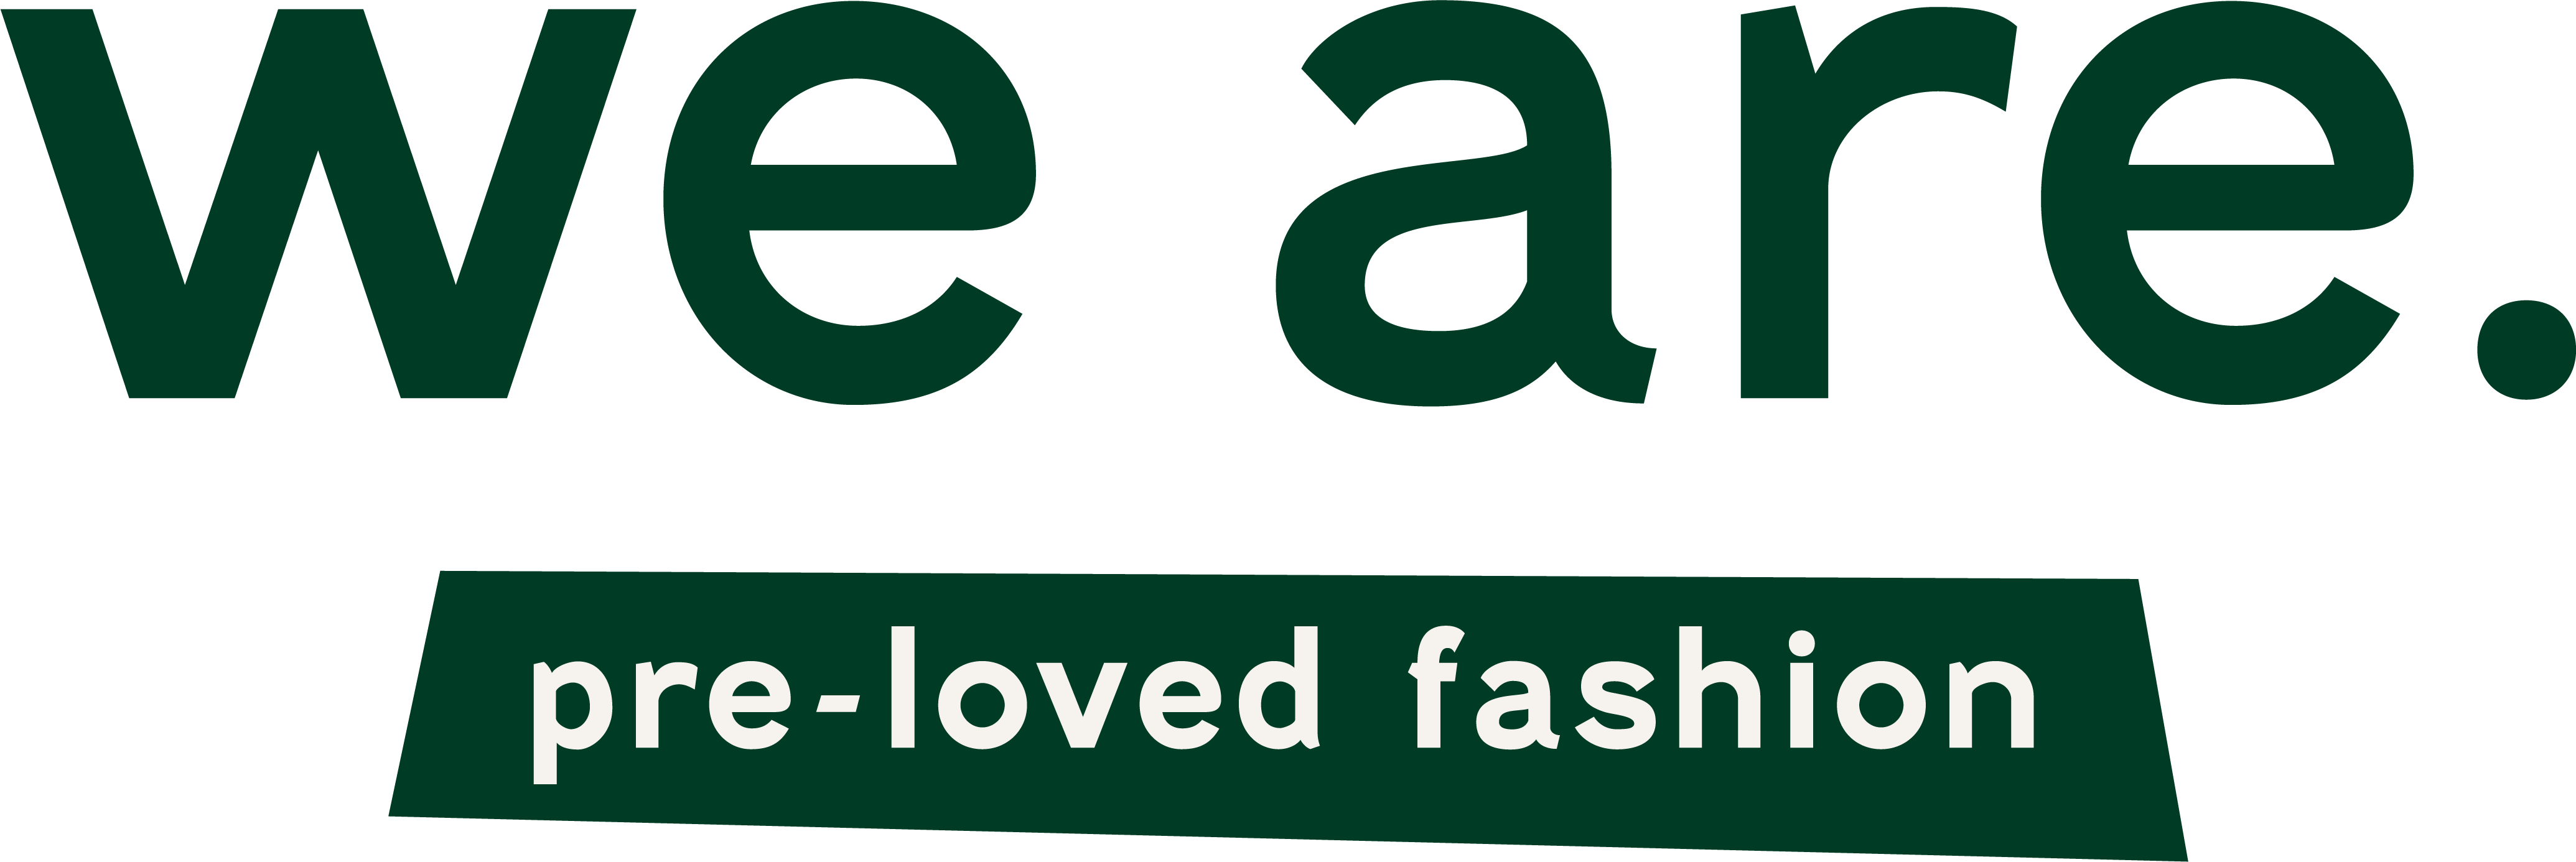 Second-Hand Clothing - Vintage & Ethical Pre-Loved Fashion